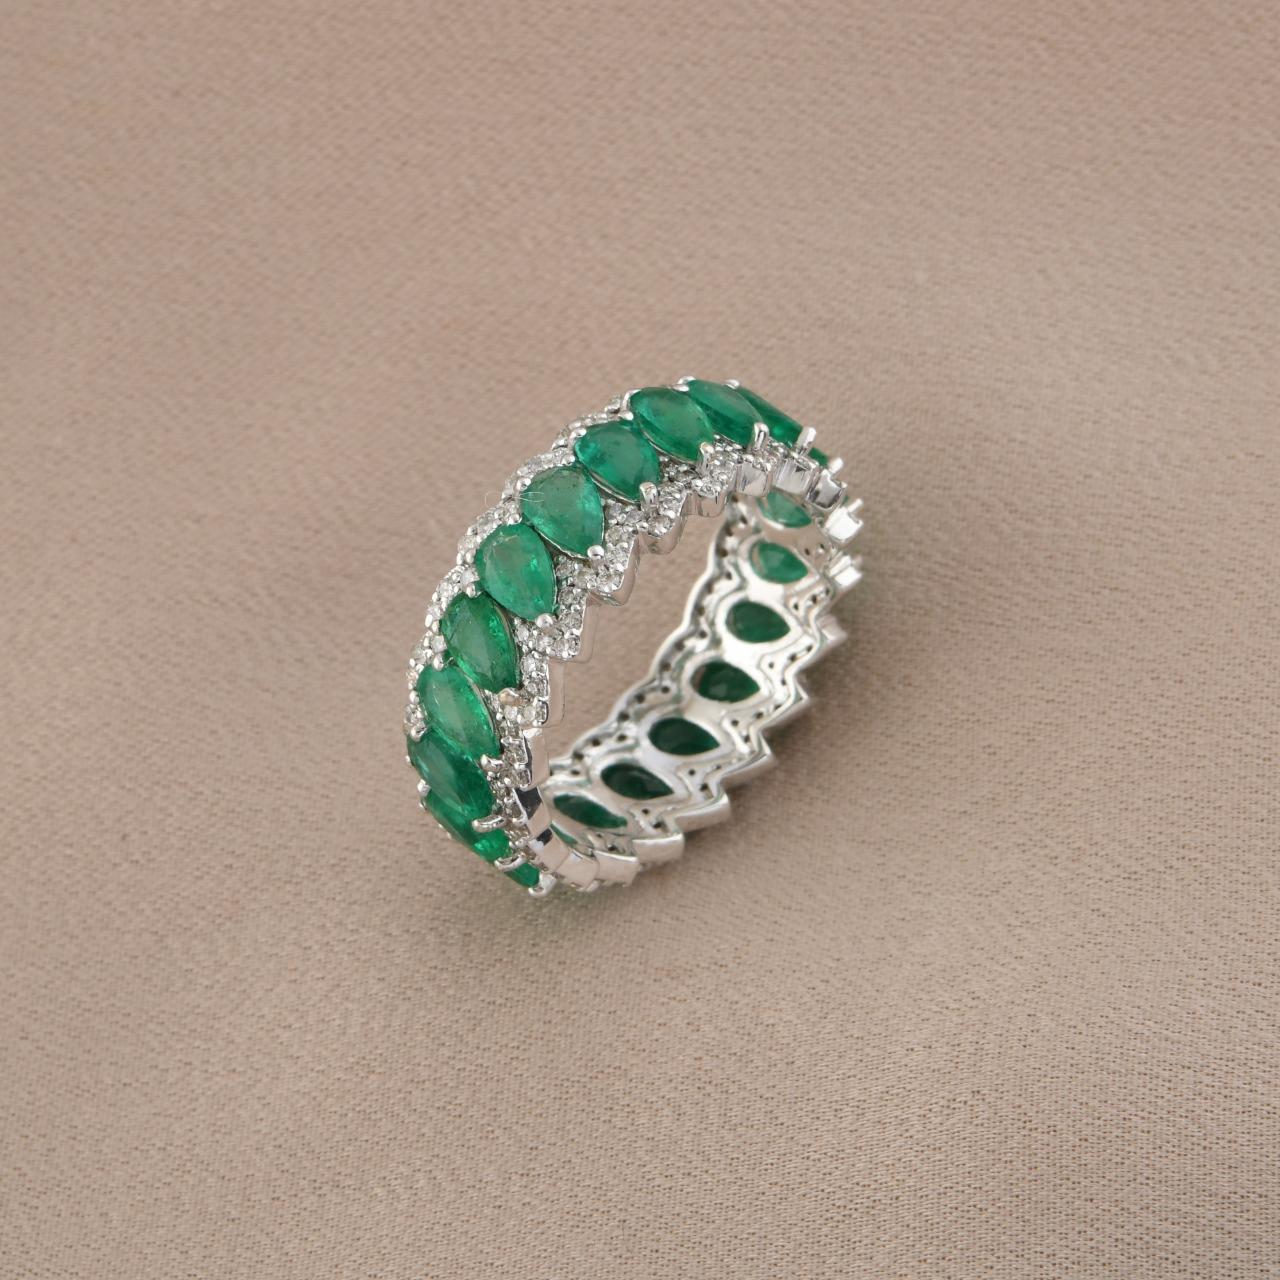 Eternity band in 18k gold with pear cut emeralds and round brilliant cut diamonds 💎, about total ct 4,50.  
Current size 54.